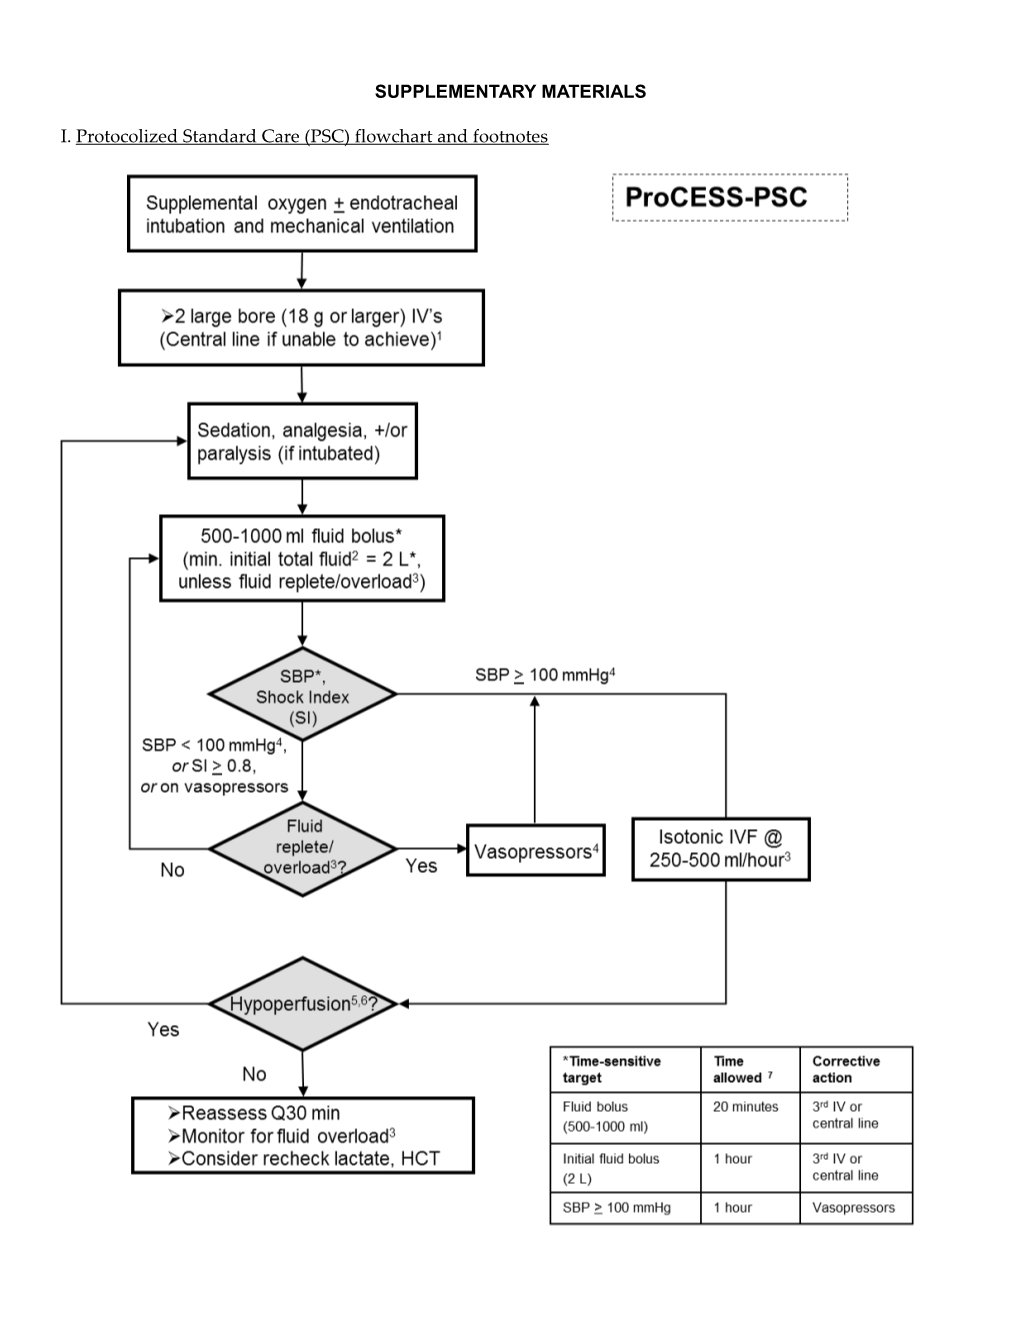 I. Protocolized Standard Care (PSC) Flowchart and Footnotes